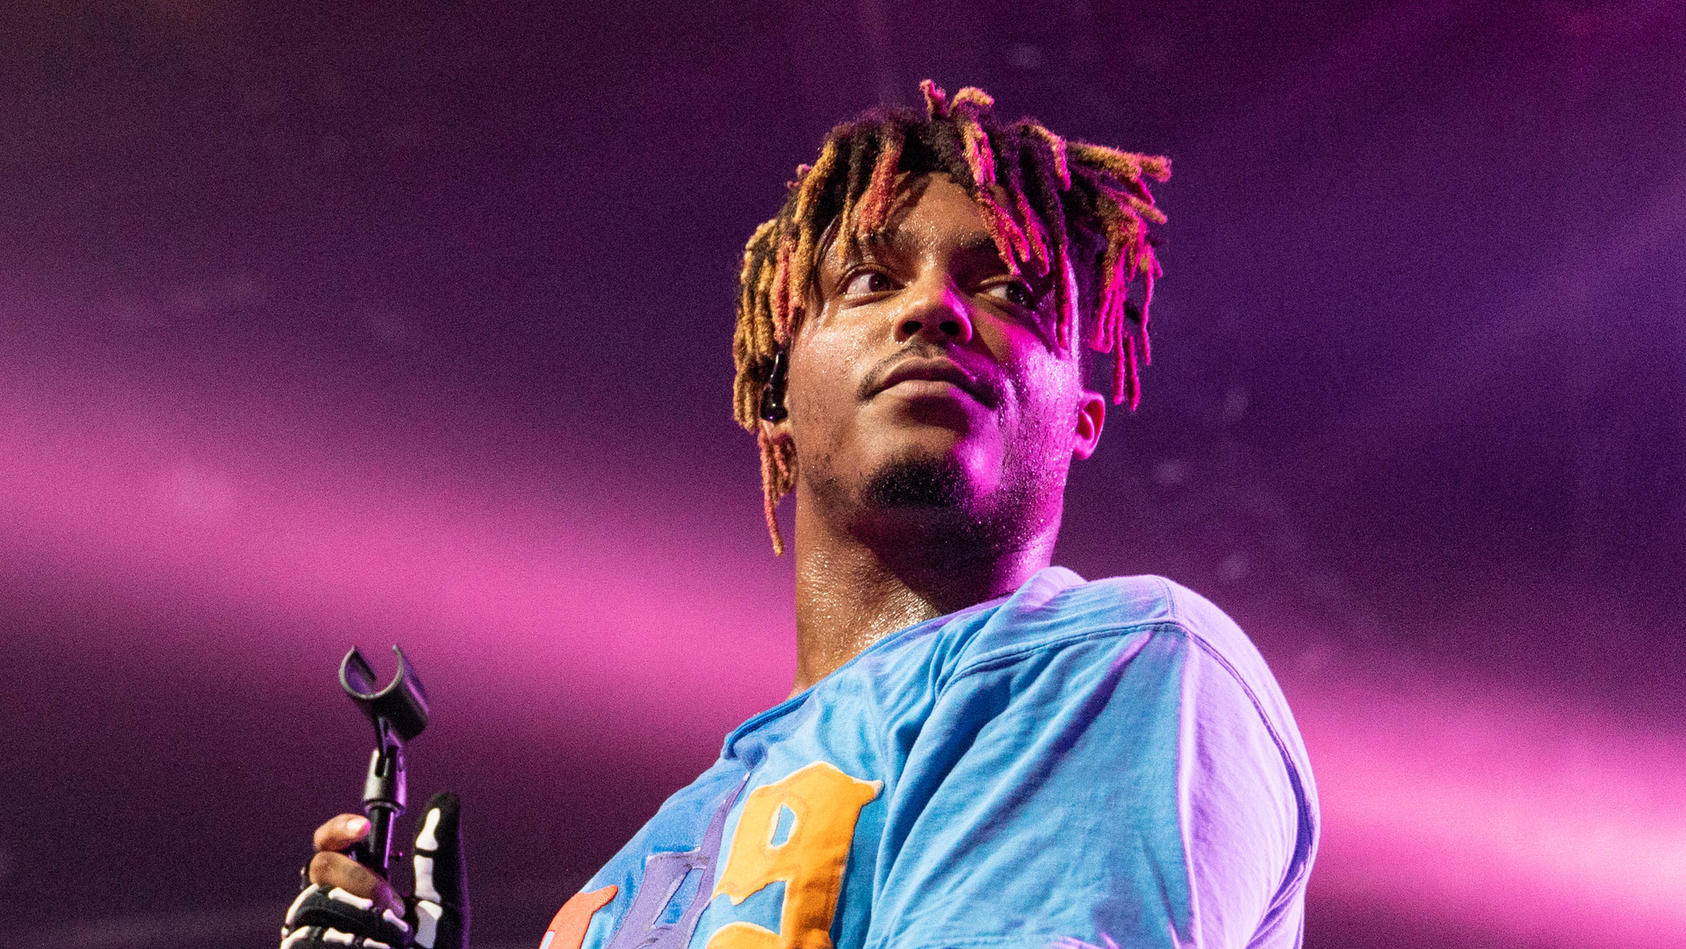 December 8, 2019, Chicago, Illinois, USA: Chicago rapper JUICE WRLD has died age 21. After landing at Chicago?s Midway airport on Sunday morning suffered a seizure and began bleeding from the mouth. He was conscious when taken to hospital, but died a